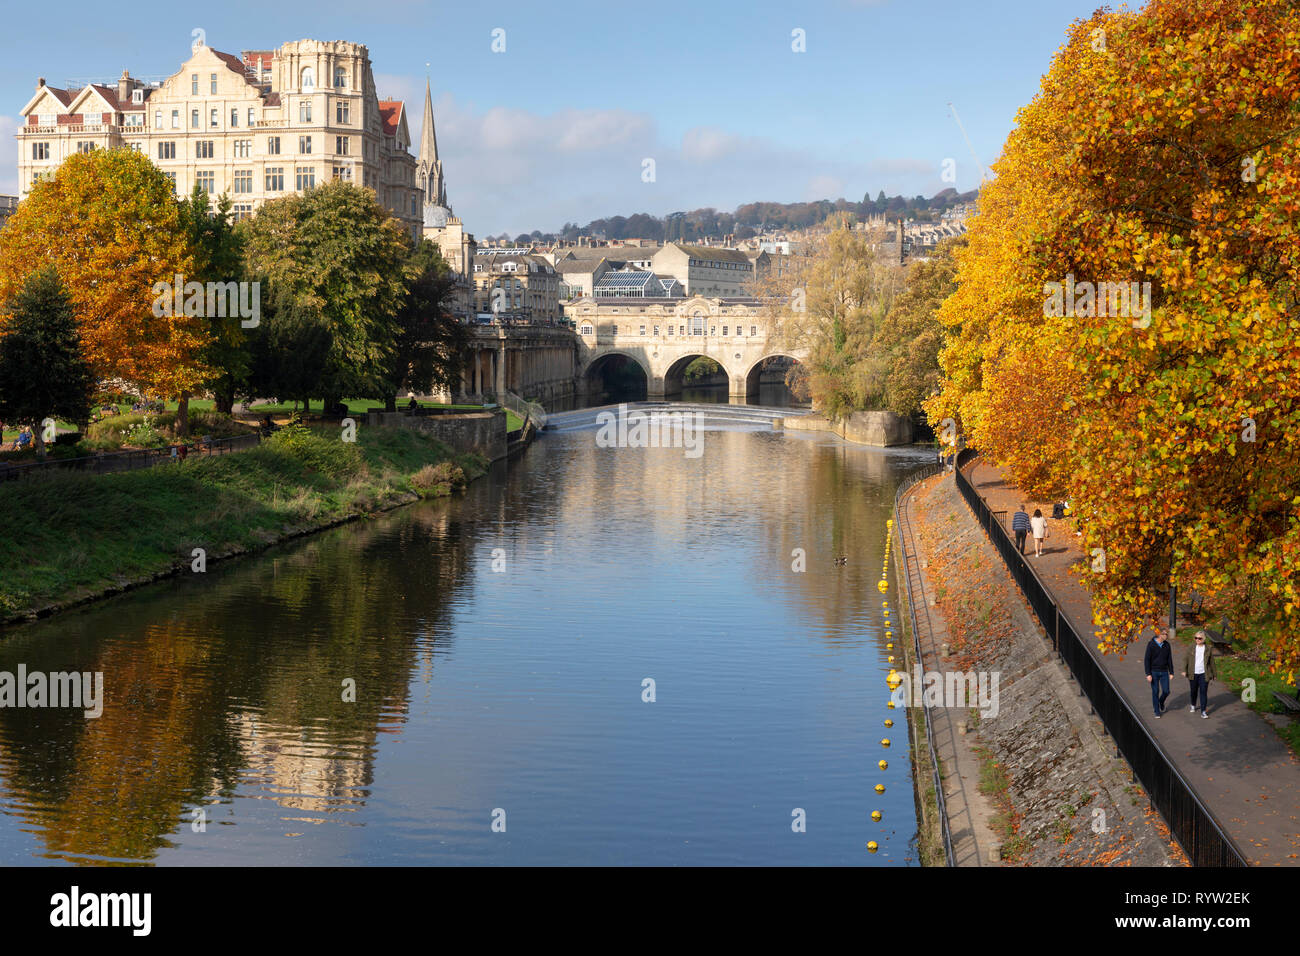 BATH, UK - OCTOBER 20, 2018: People walking by Pulteney Weir and Pulteney Bridge surrounded by vibrant autumnal trees on the River Avon in Bath, UK. Stock Photo